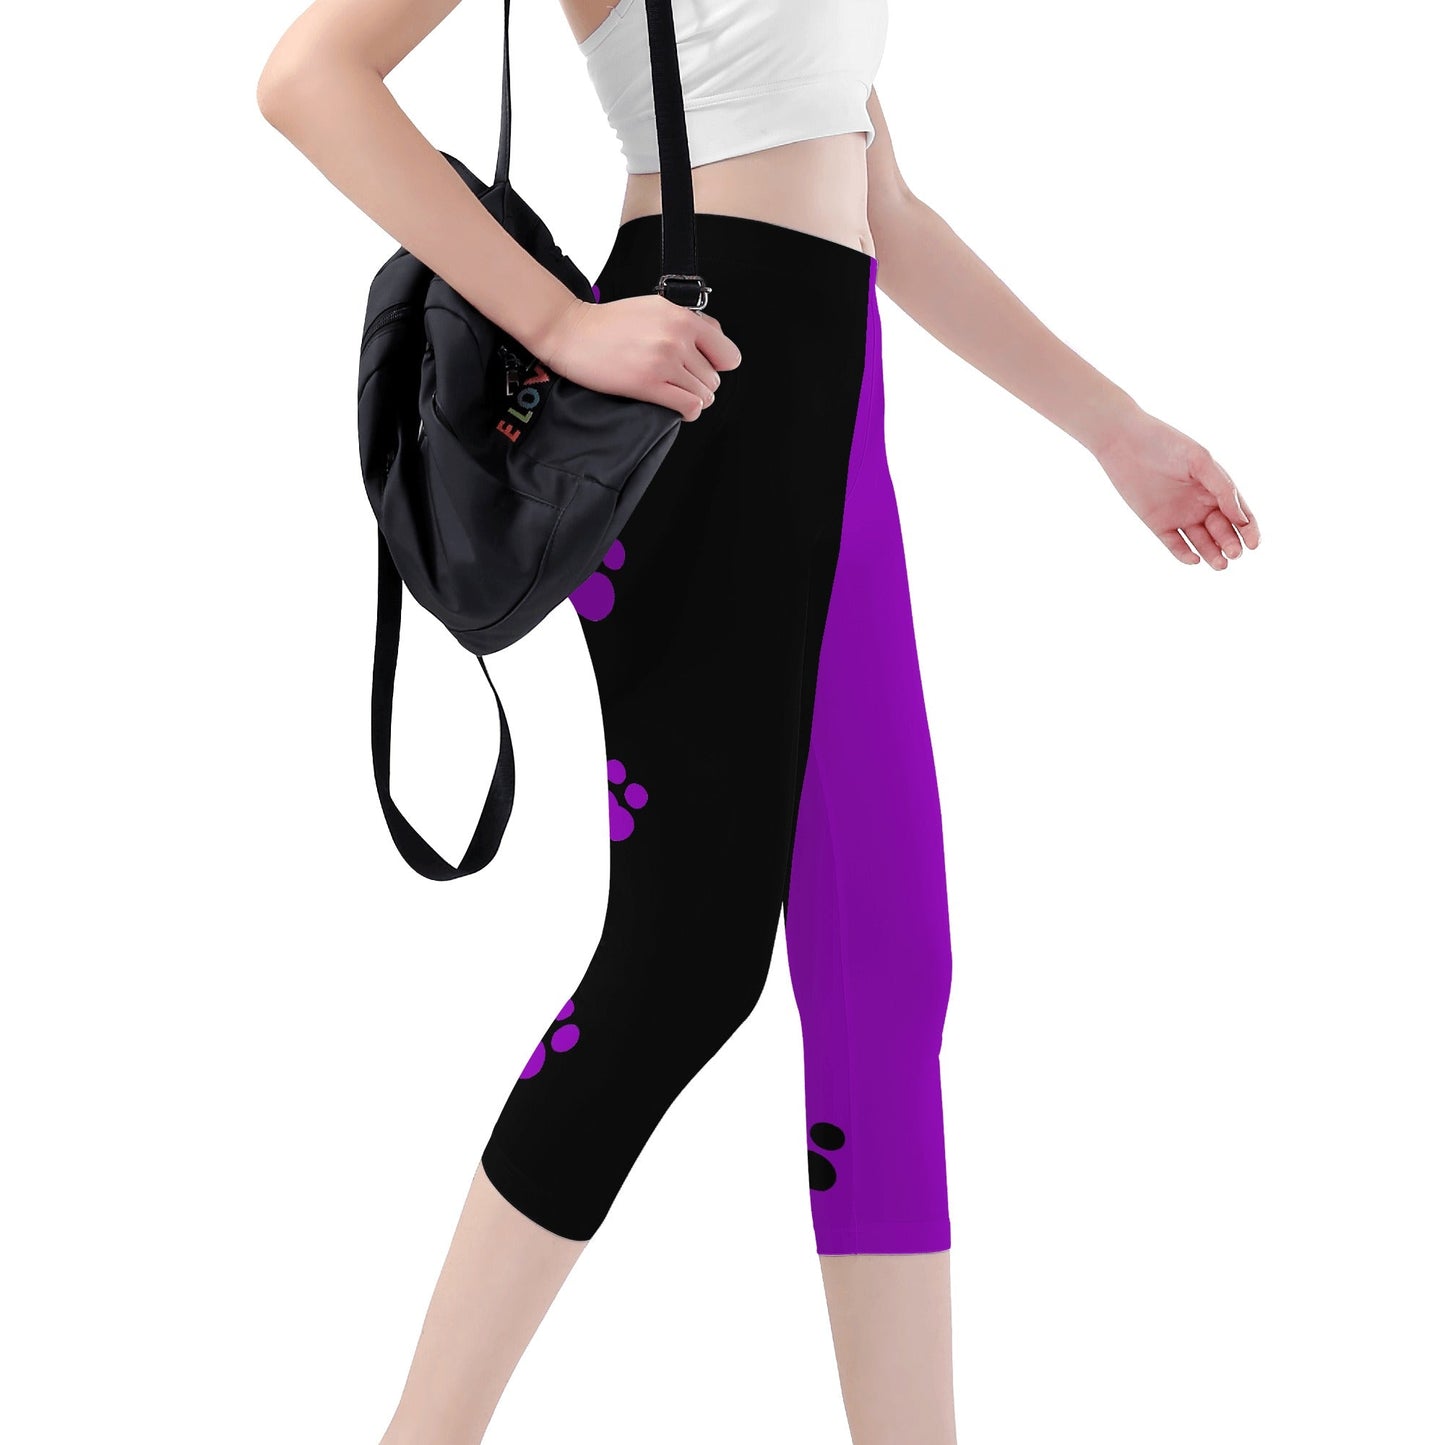 Stand out  with the  2 Tone Womens Capris  available at Hey Nugget. Grab yours today!